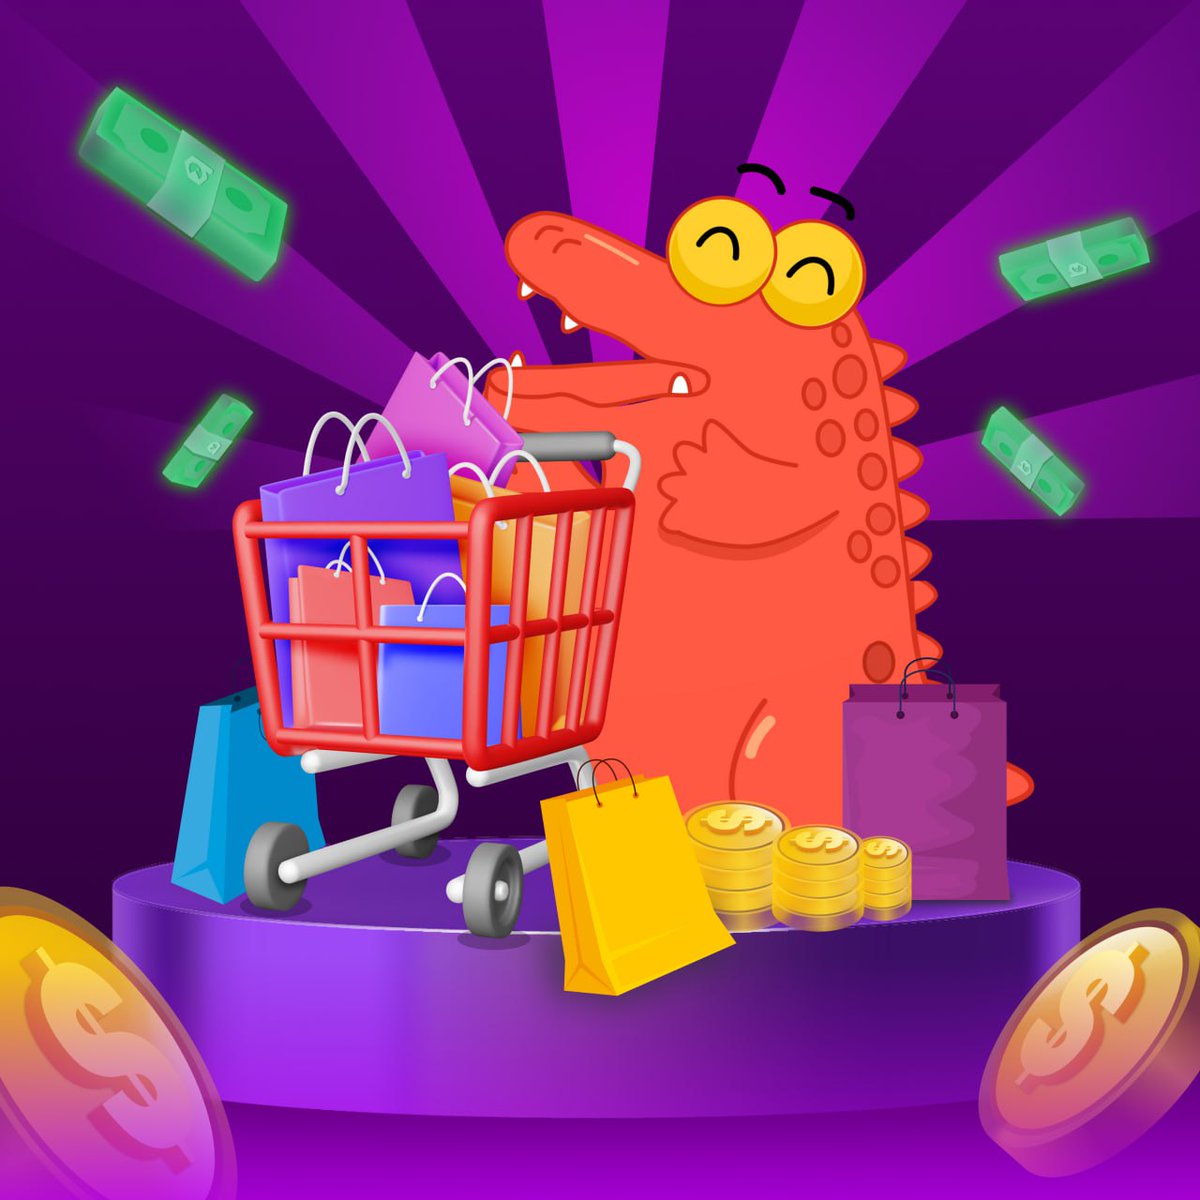 Nothing beats the rush of a BIG WIN! 💰💥 If you hit the jackpot, what's the first thing on your shopping list to buy?